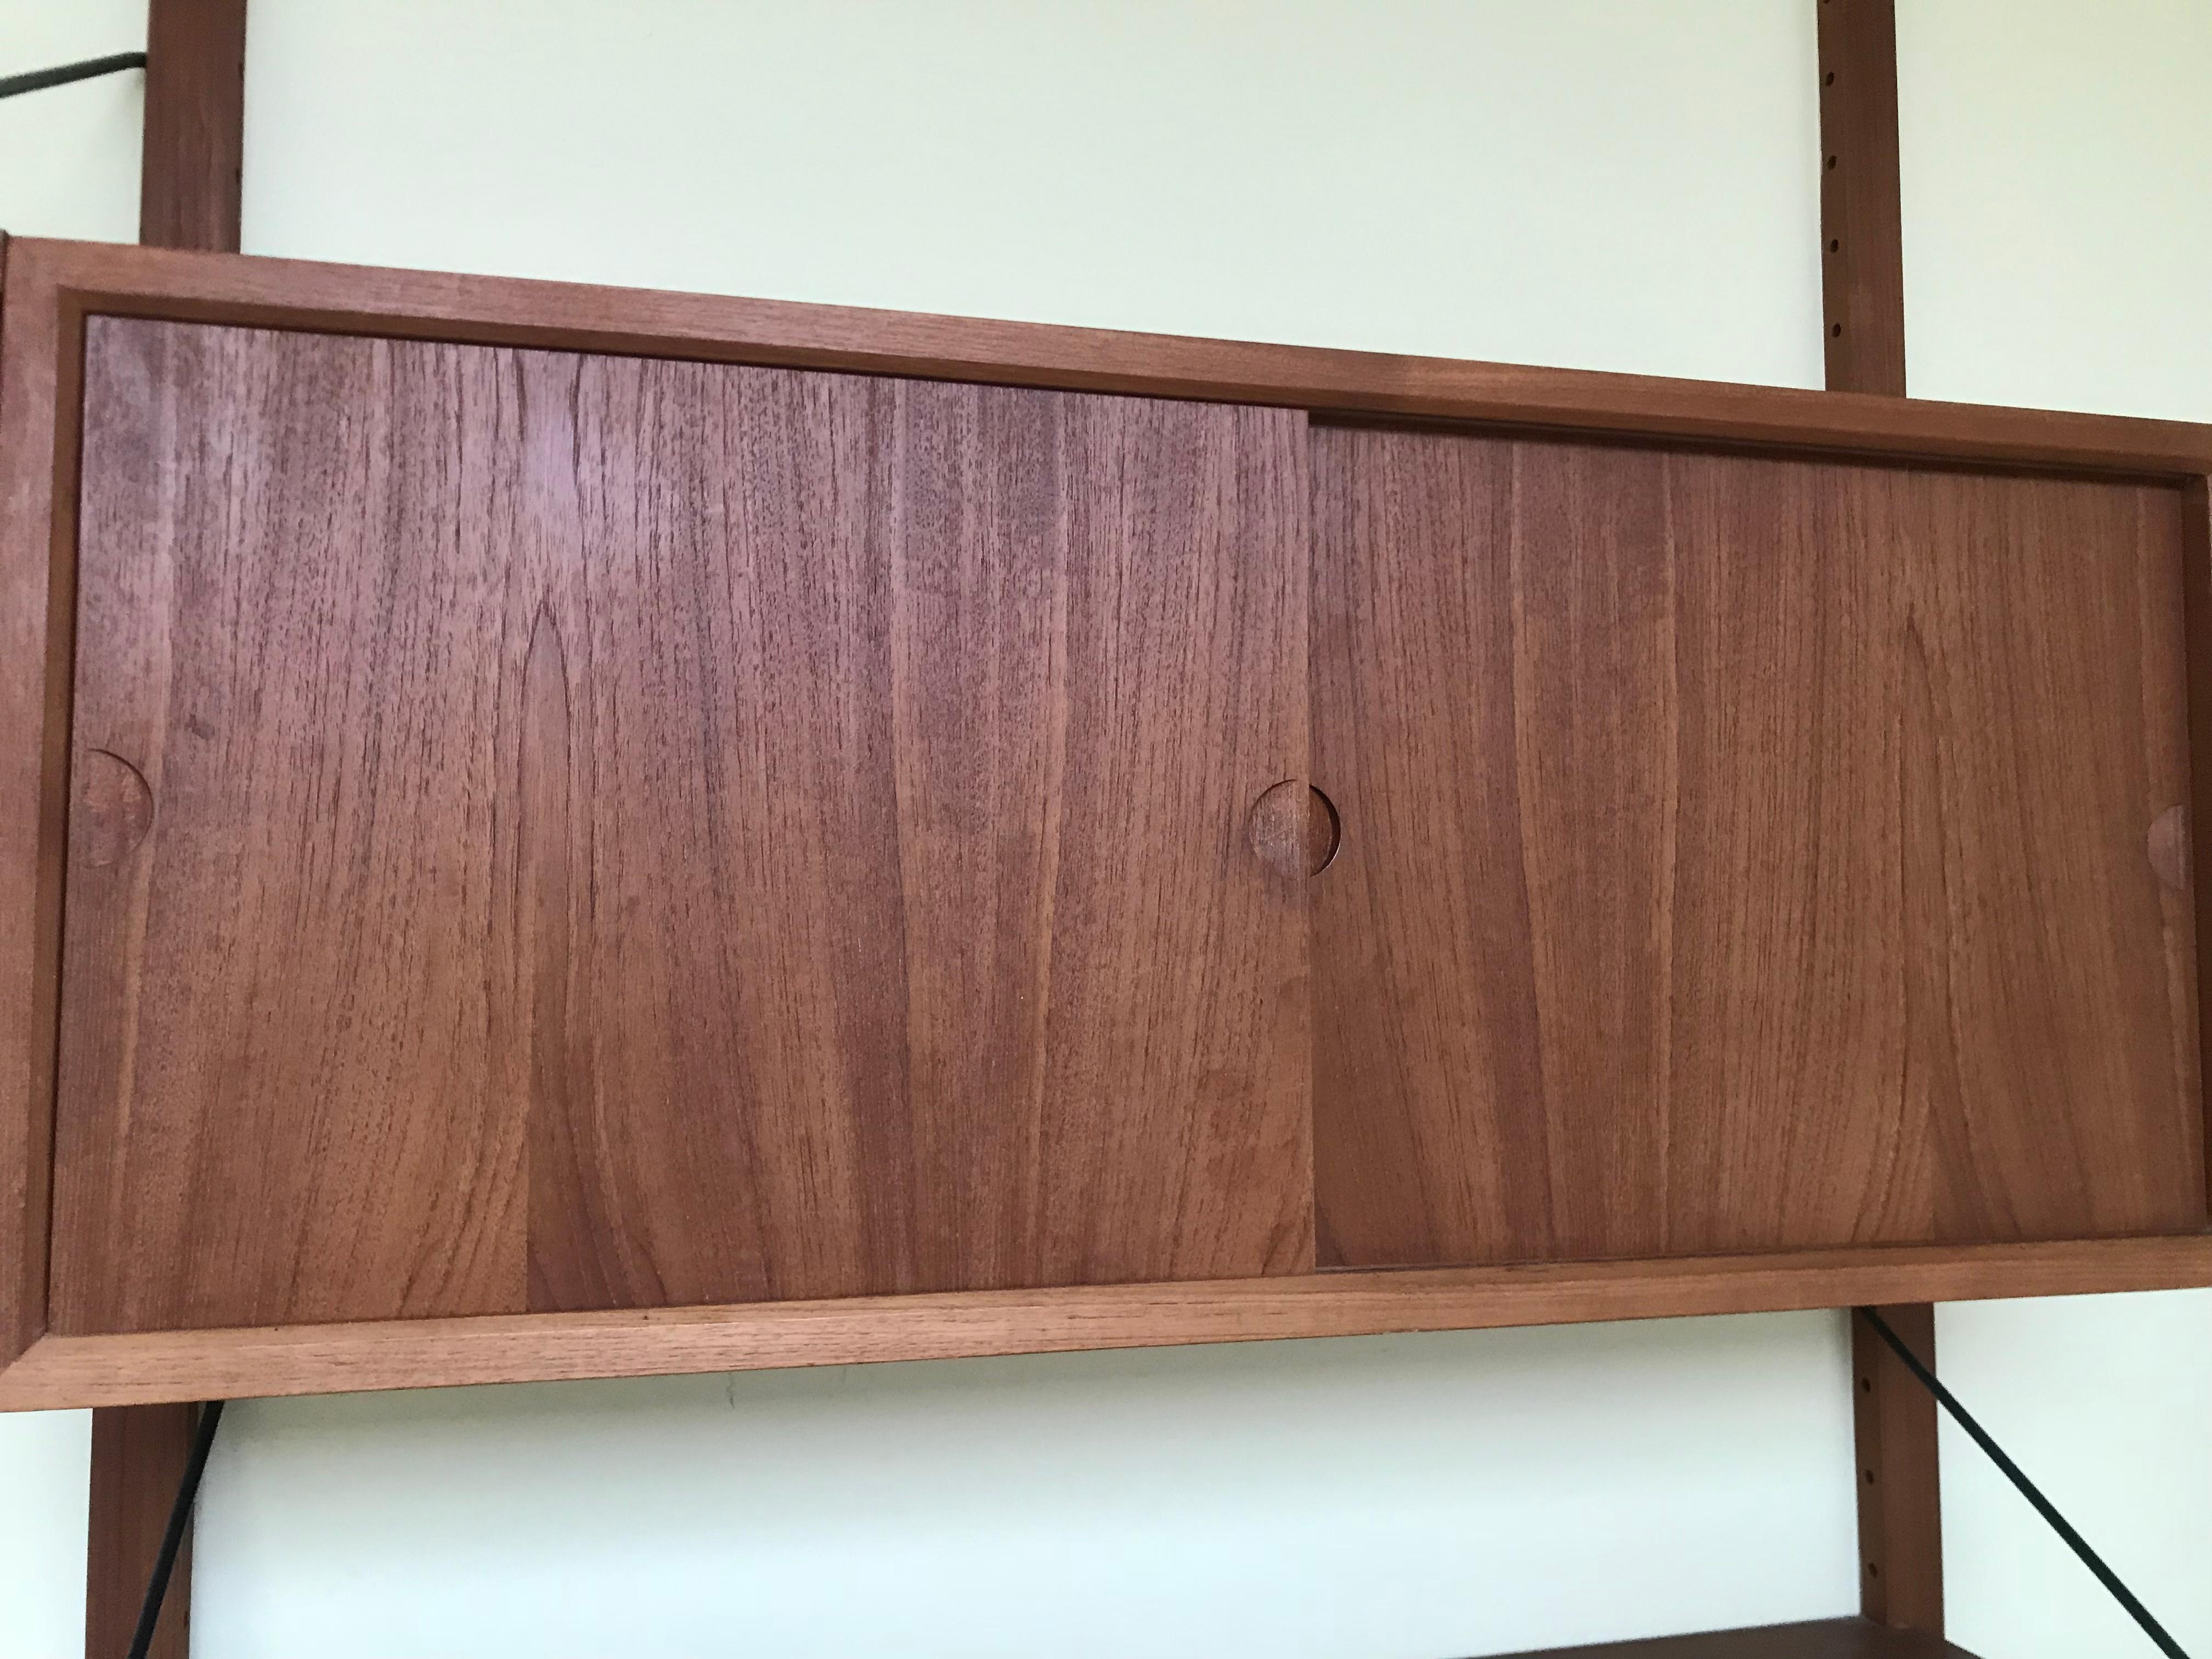 Highly versatile and functional Cado wall unit in teak by Danish designer Poul Cadovius. Wall unit is in very nice vintage condition with light age appropriate wear. Each support rail is 78